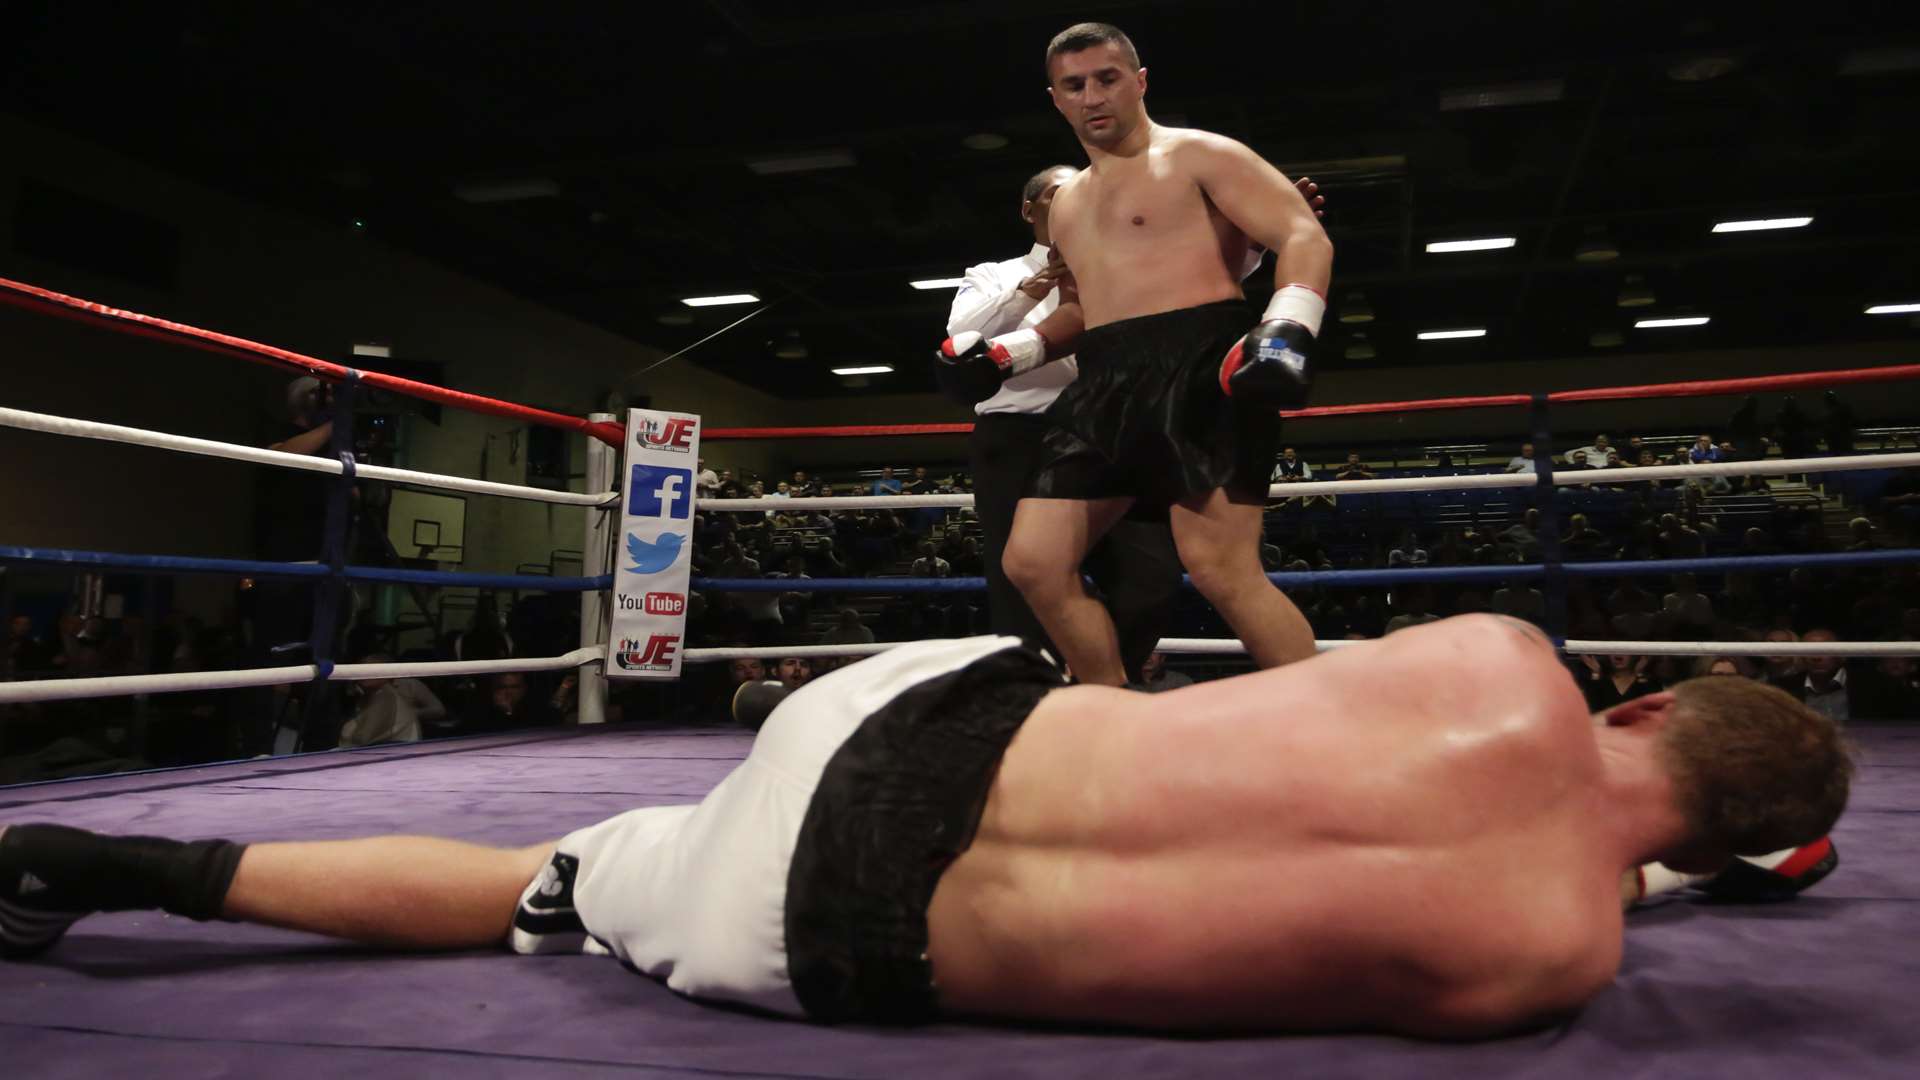 Tom Dallas was caught out on his return to the ring after a promising start against Igor Mihaljevic Picture: Countrywide Photographic